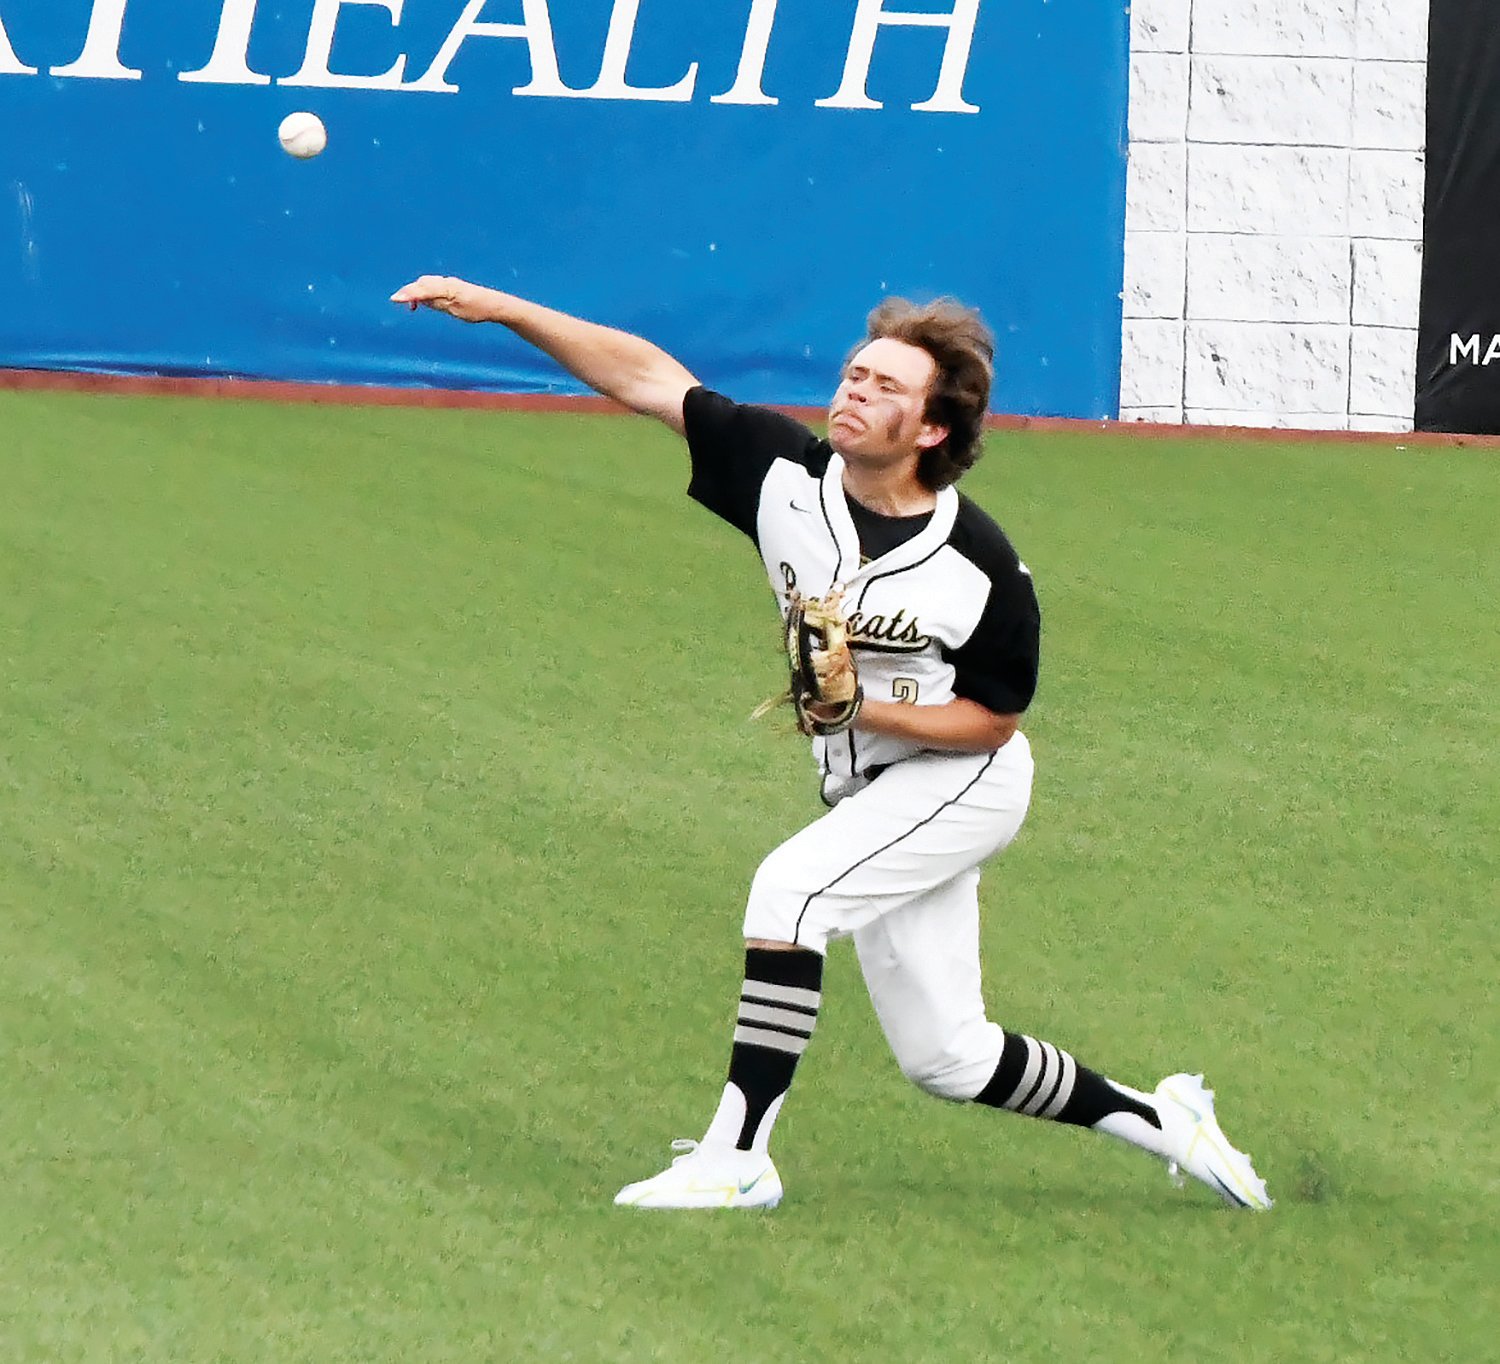 Cairo’s Austin Wright begins a relay from center field during the Class 1 third-place game versus South Nodaway at U.S. Baseball Park in Ozark on May 31. Wright was named a first-team all-state outfielder.